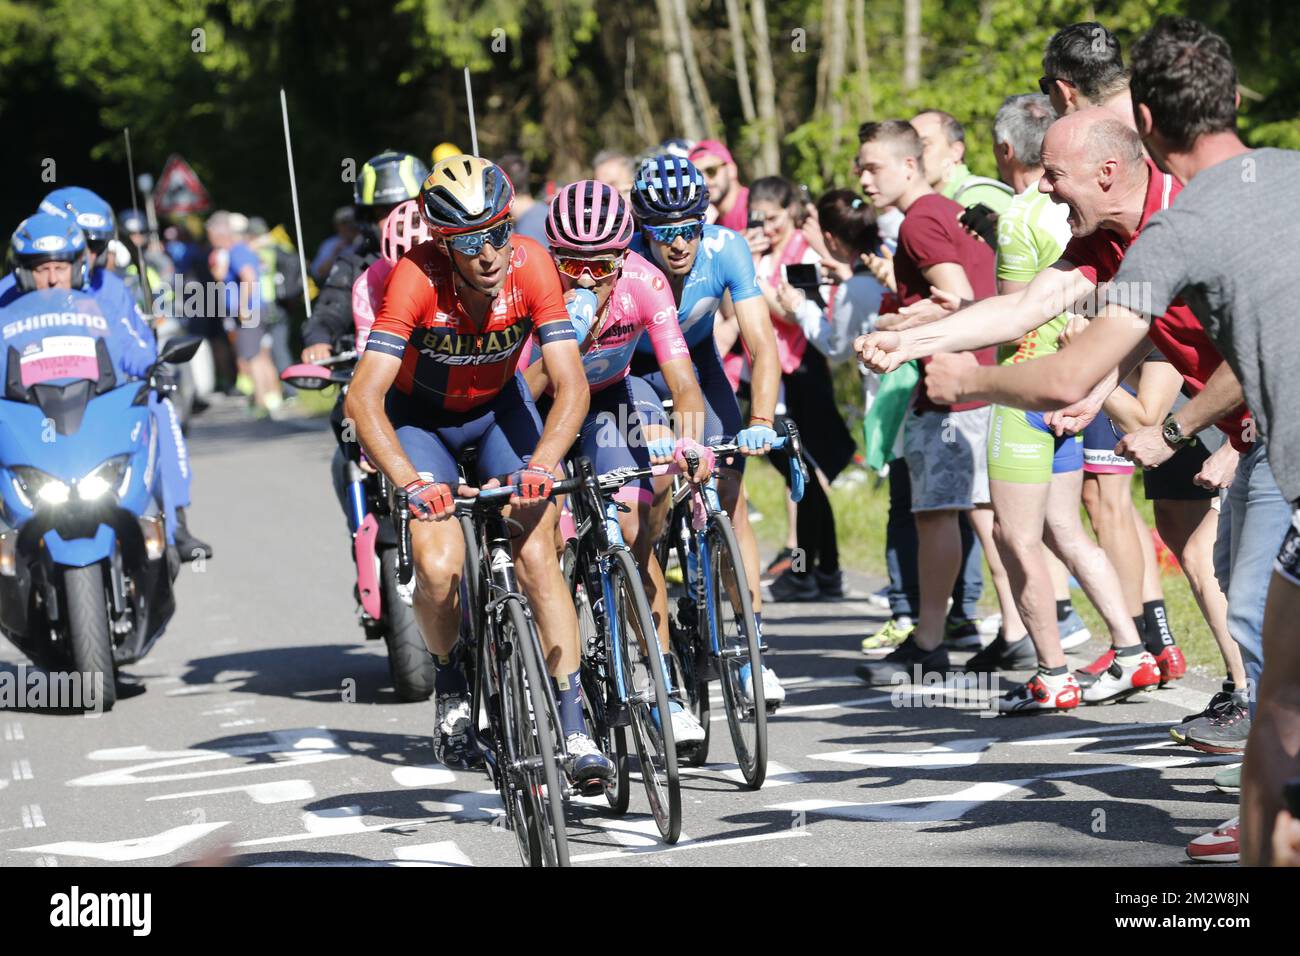 Italian Vincenzo Nibali of Bahrain-Merida and Ecuadorian Richard Carapaz of Movistar Team pictured in action during the twentieth stage of the 101st edition of the Giro D'Italia cycling race, 194km from Feltre to Croce d'Aune-Monte Avena, Italy, Saturday 01 June 2019. BELGA PHOTO YUZURU SUNADA FRANCE OUT  Stock Photo